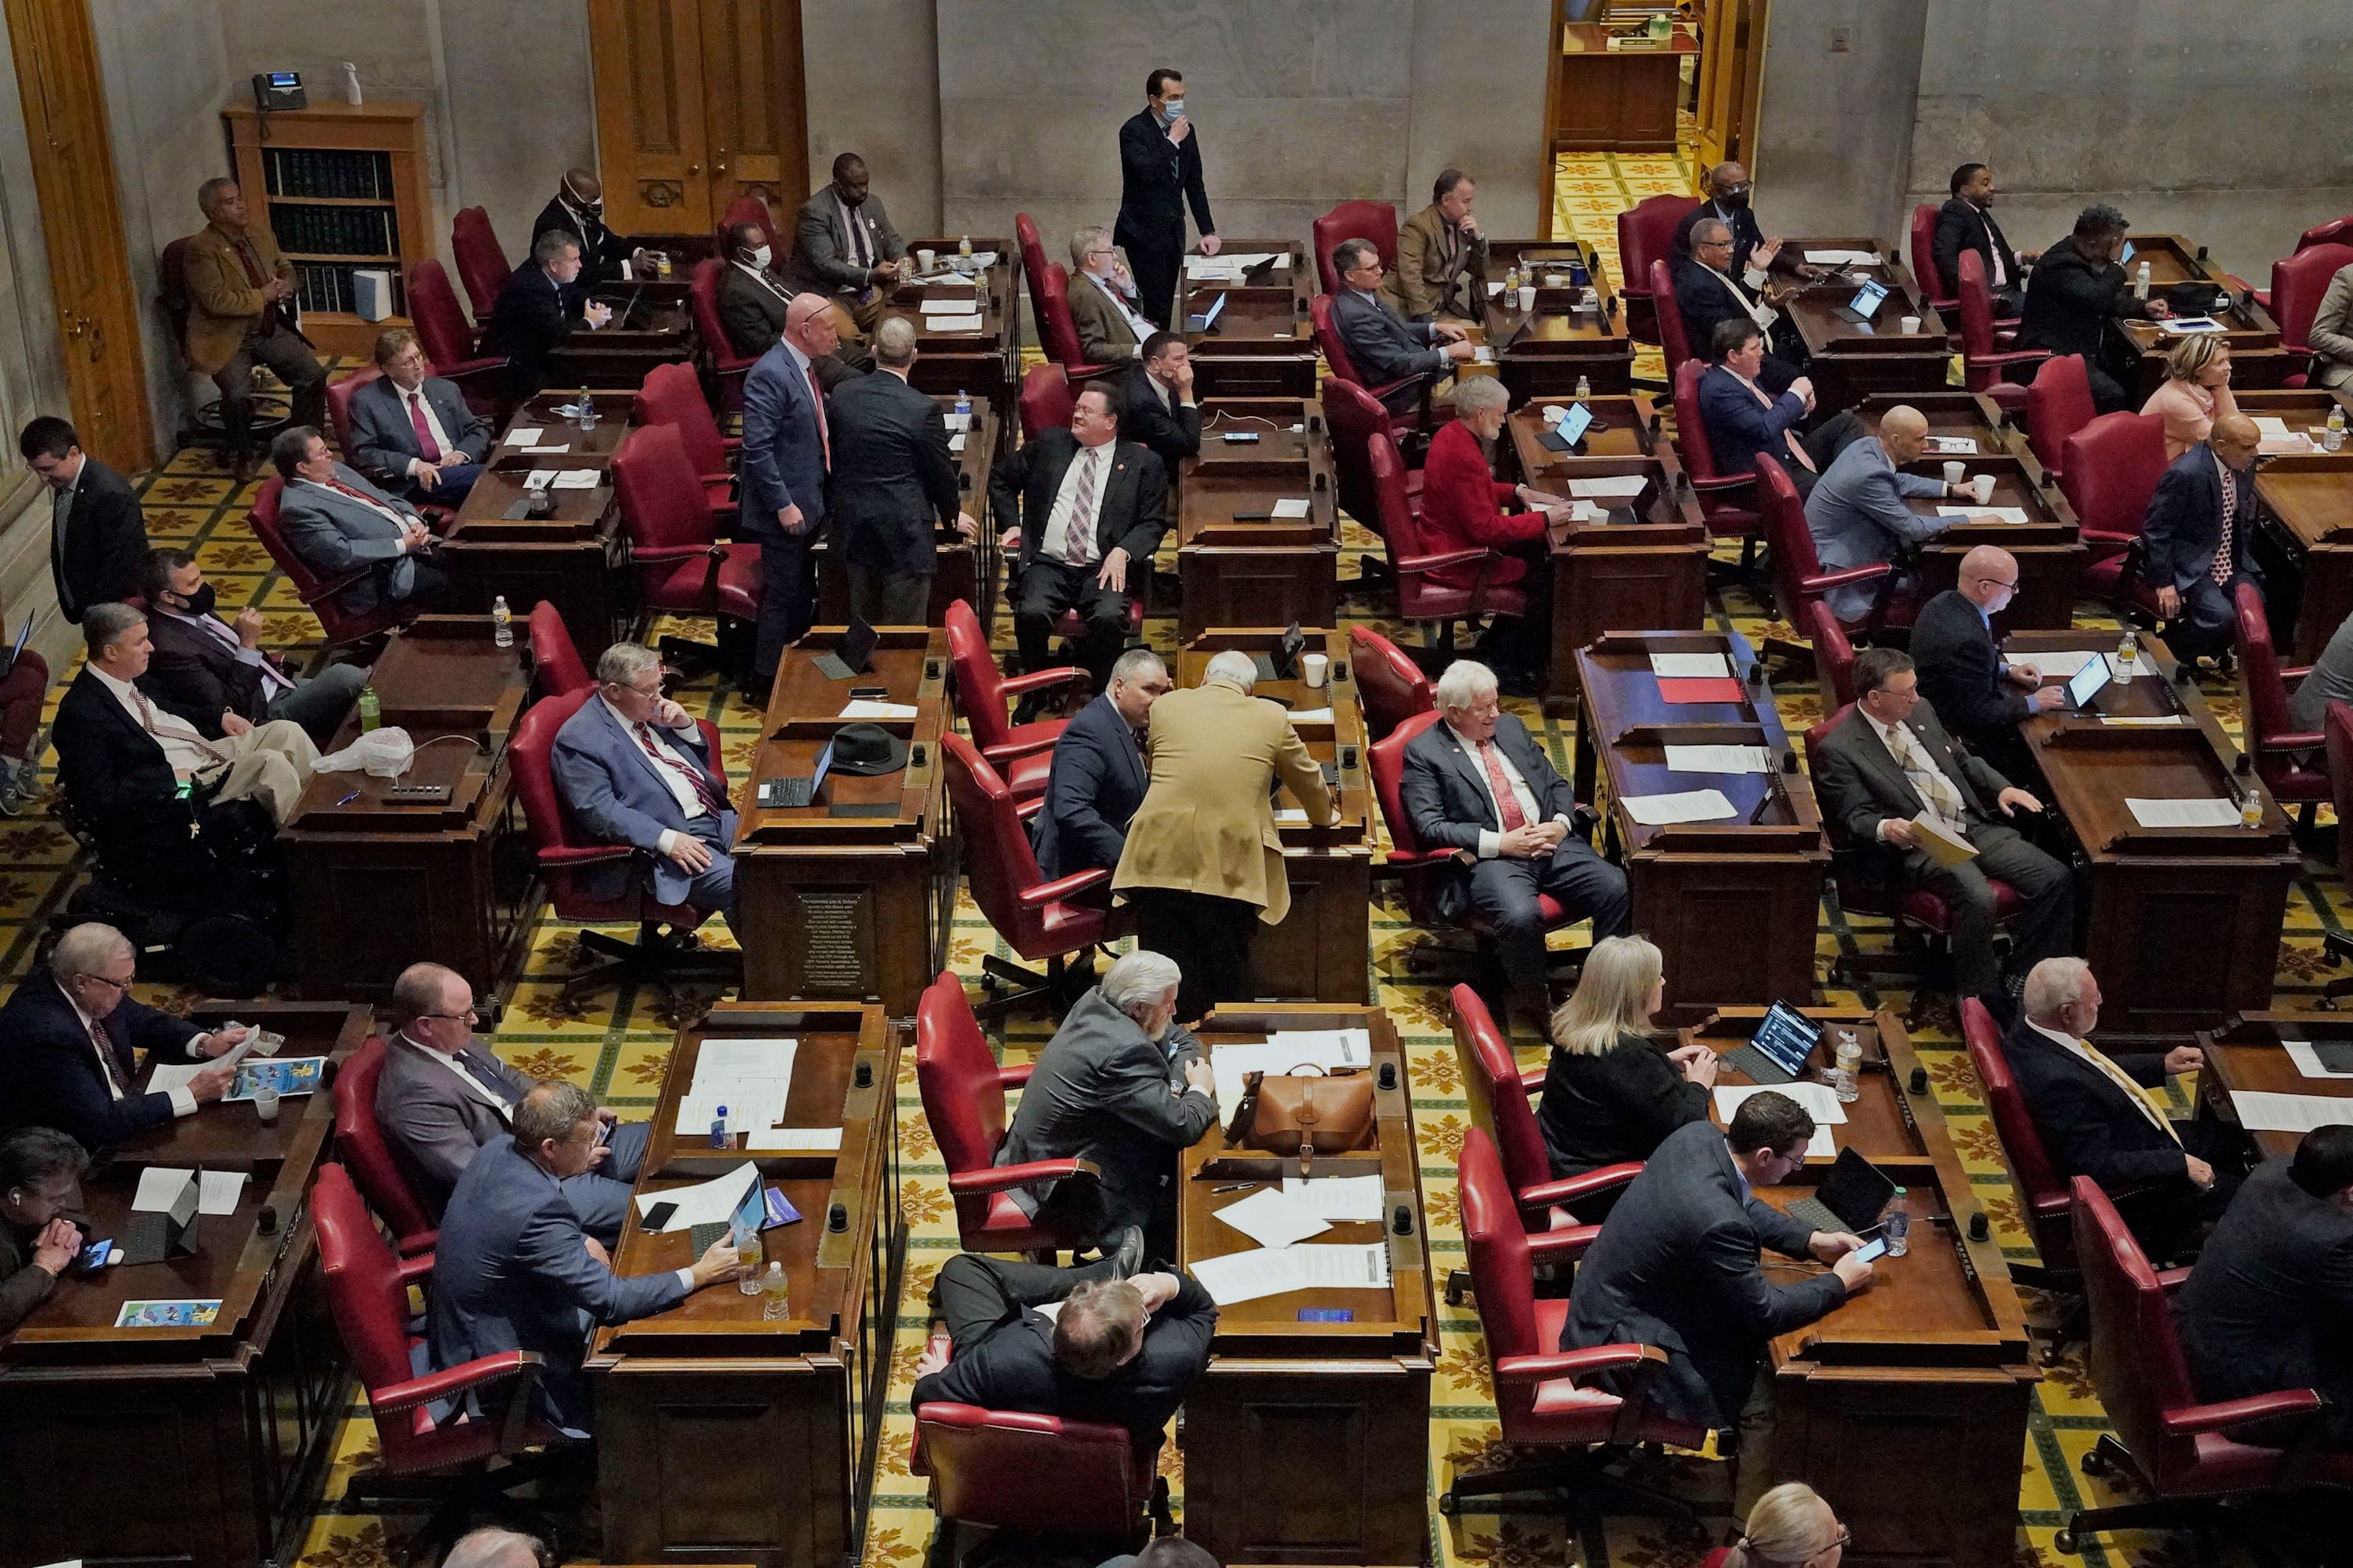 Men and women wearing suits sit behind desks in a large legislative chamber.